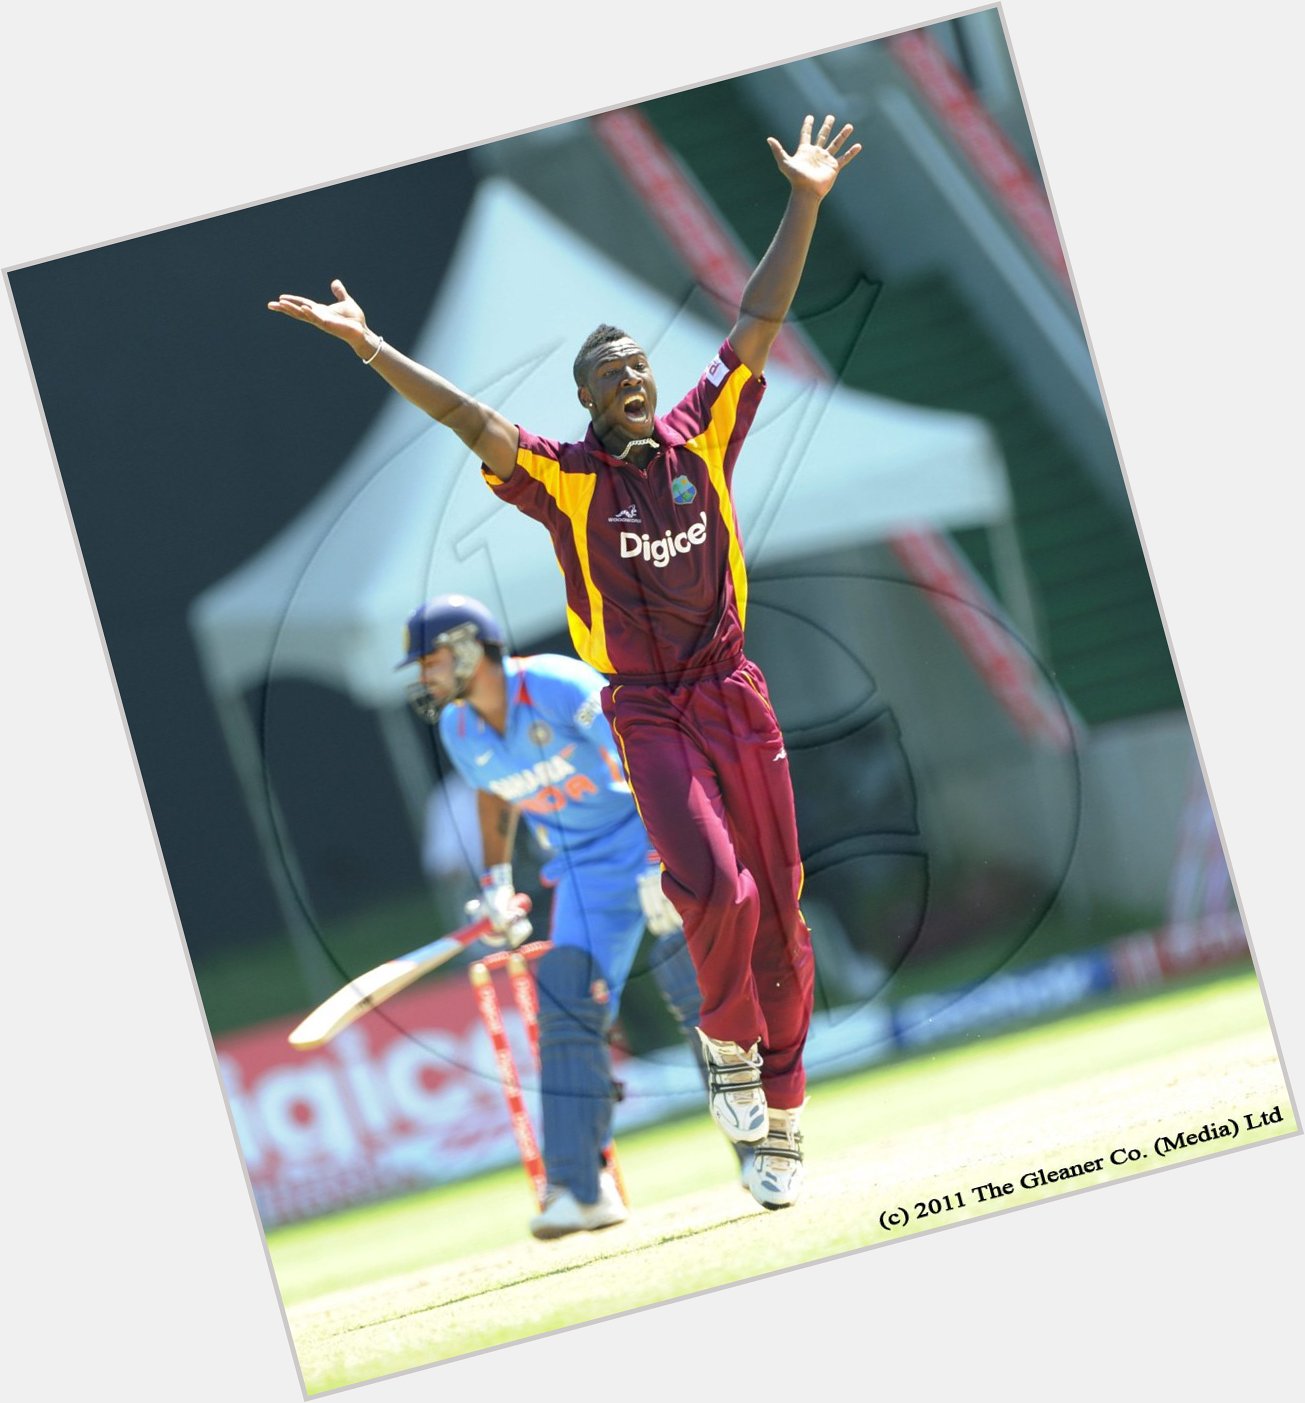 This Day In Our Past: April 29, 1988
Andre Russell was born
Happy Birthday Andre! 